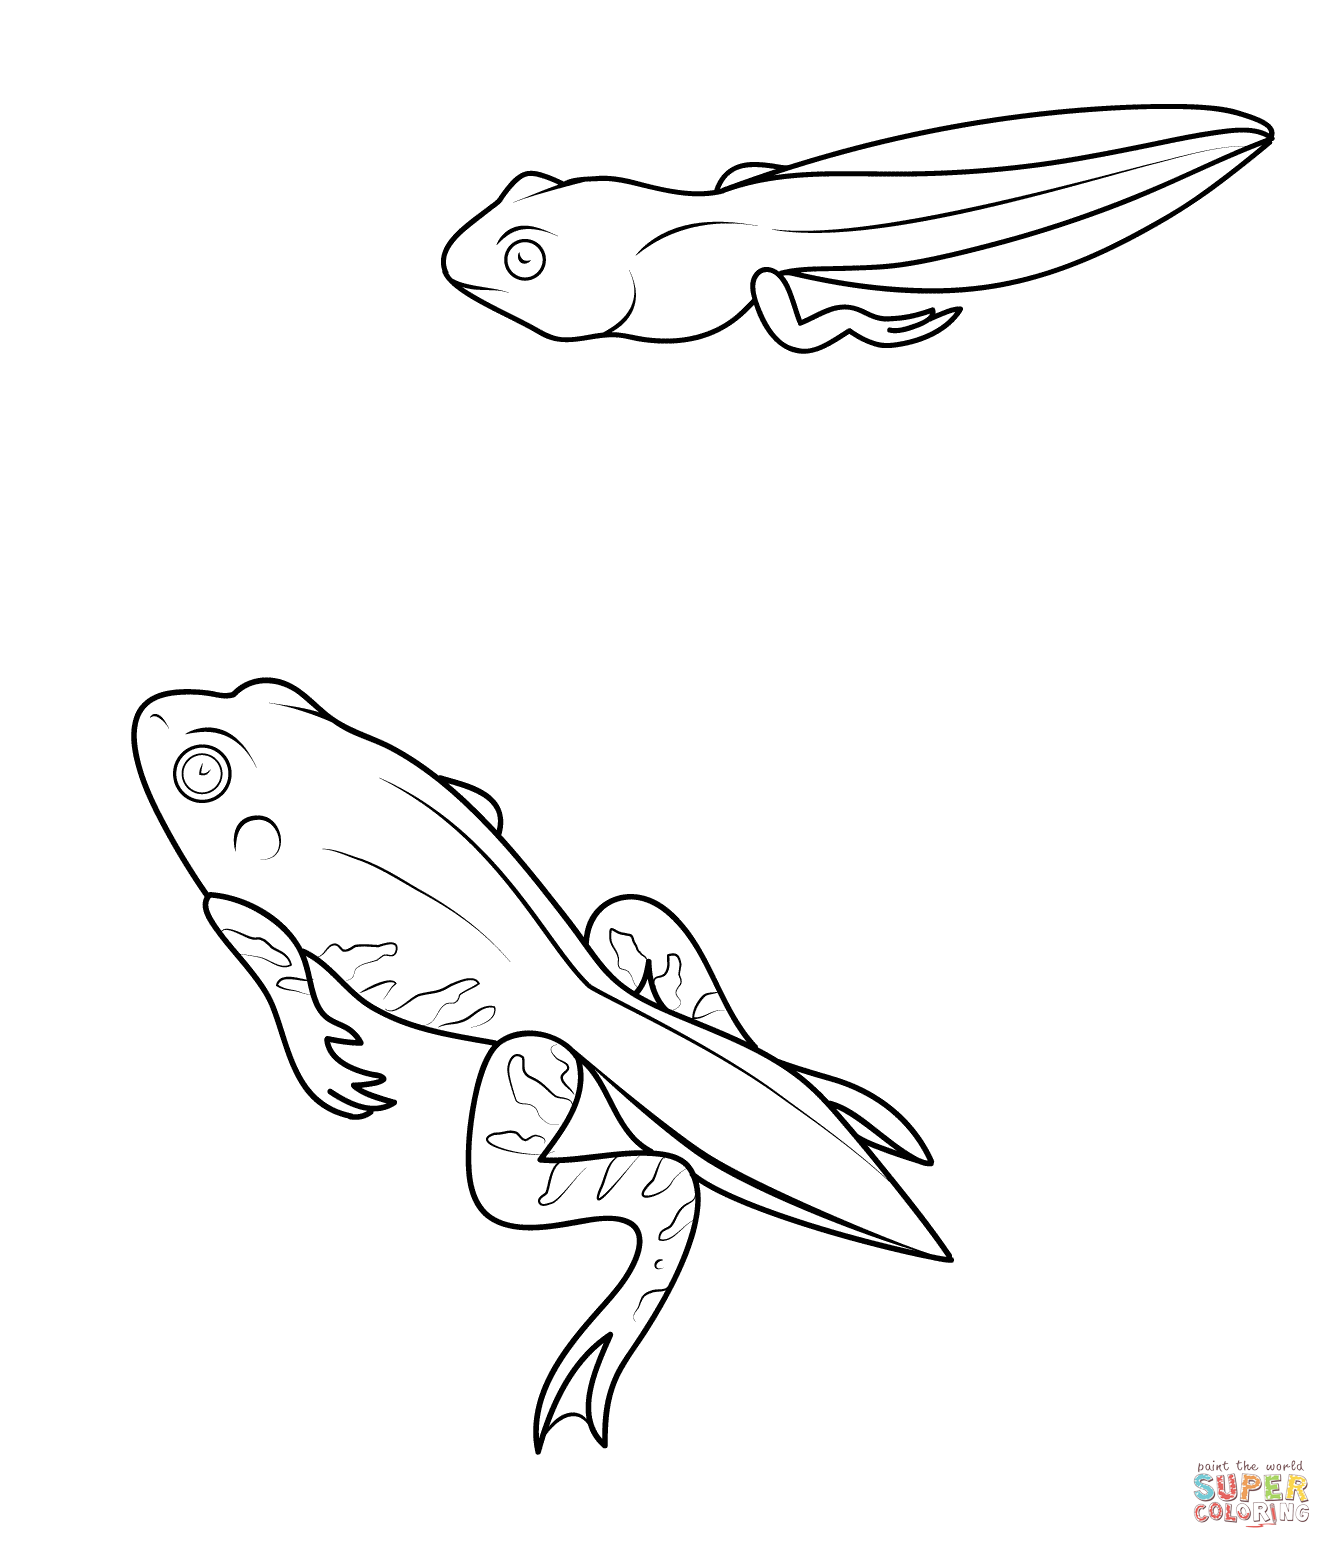 Tadpole coloring #13, Download drawings